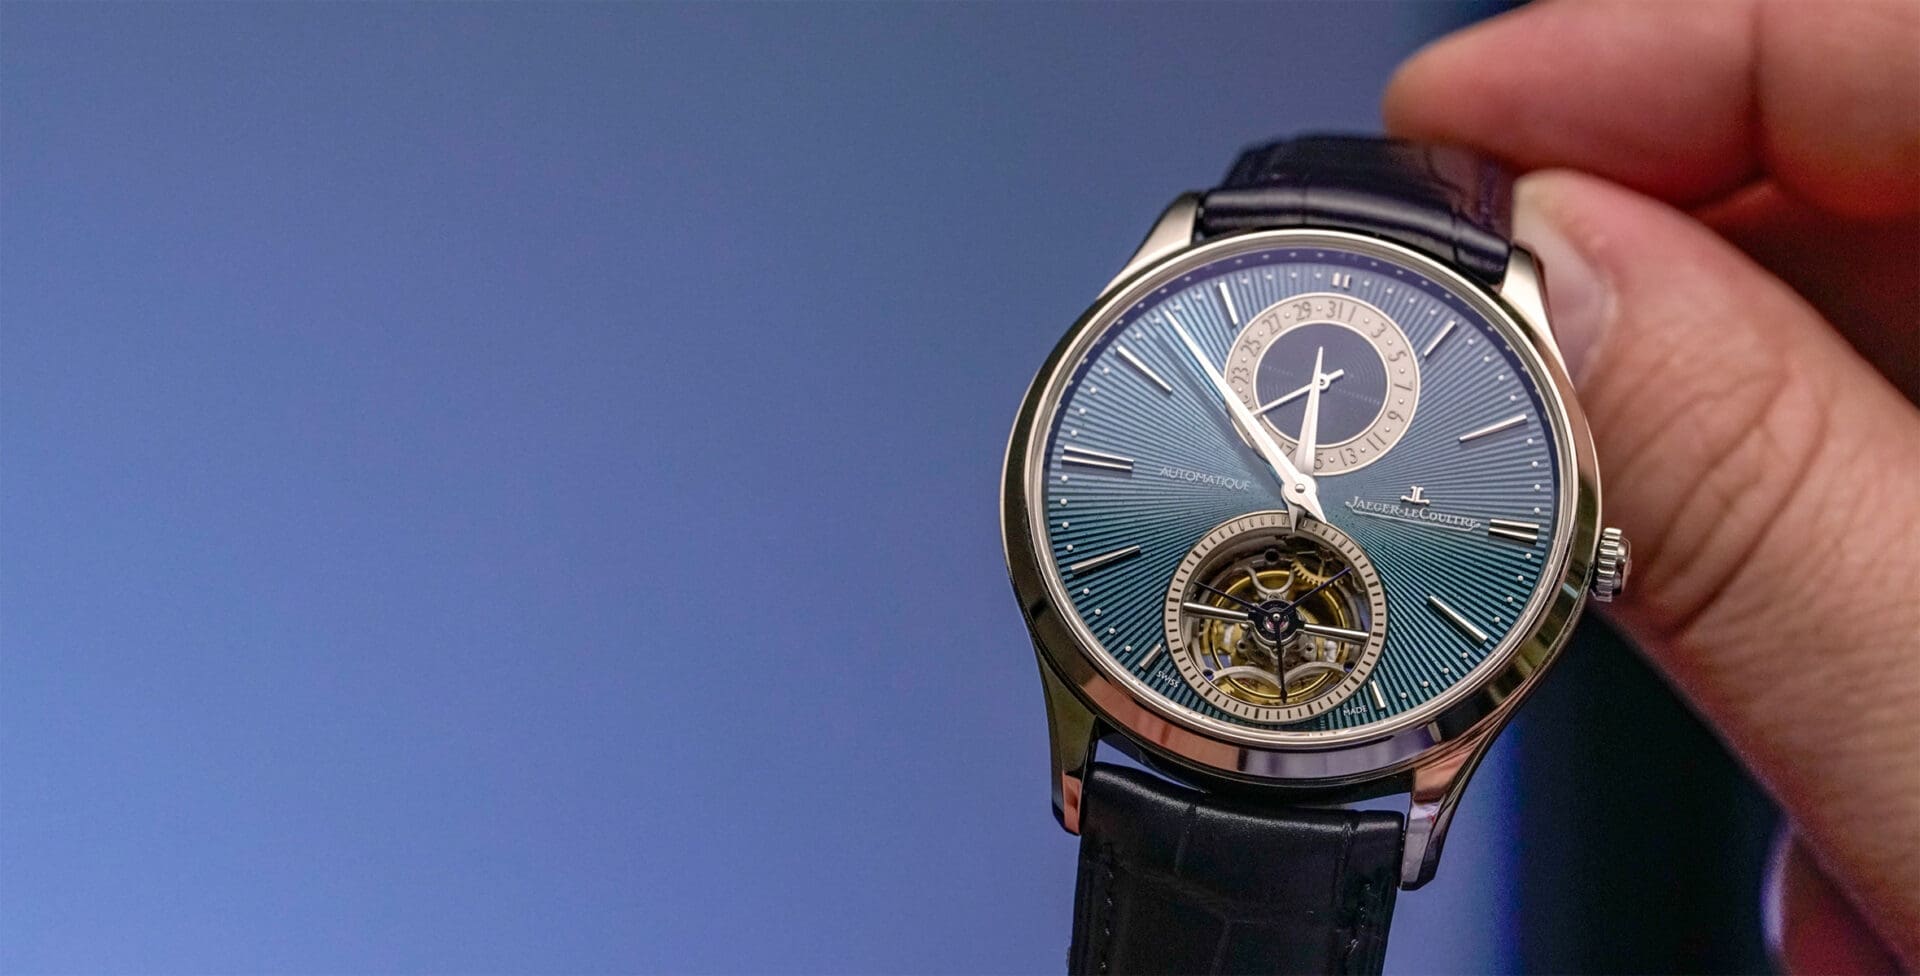 VIDEO: 5 stunning Jaeger-LeCoultre watches from SIHH 2019